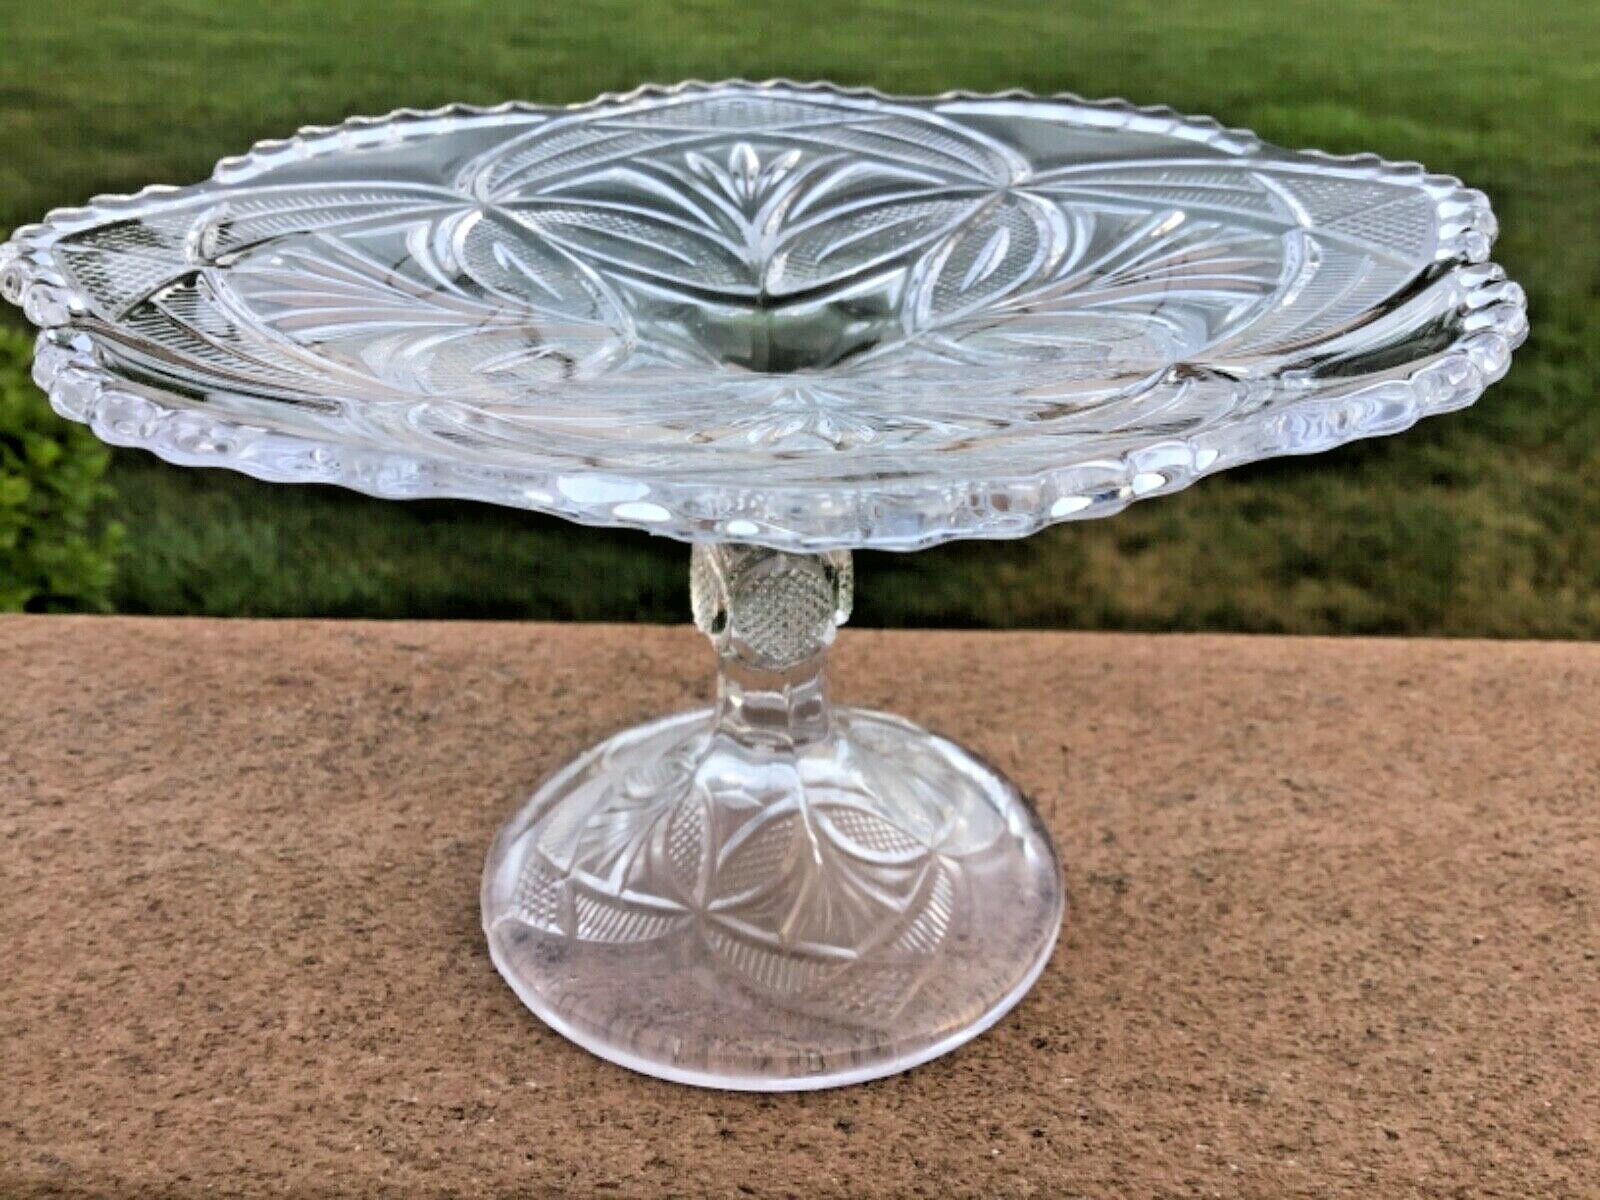 Primary image for Toy Size Cake Stand Higbee Glass Beautiful Lady Pattern Topper for Stacking